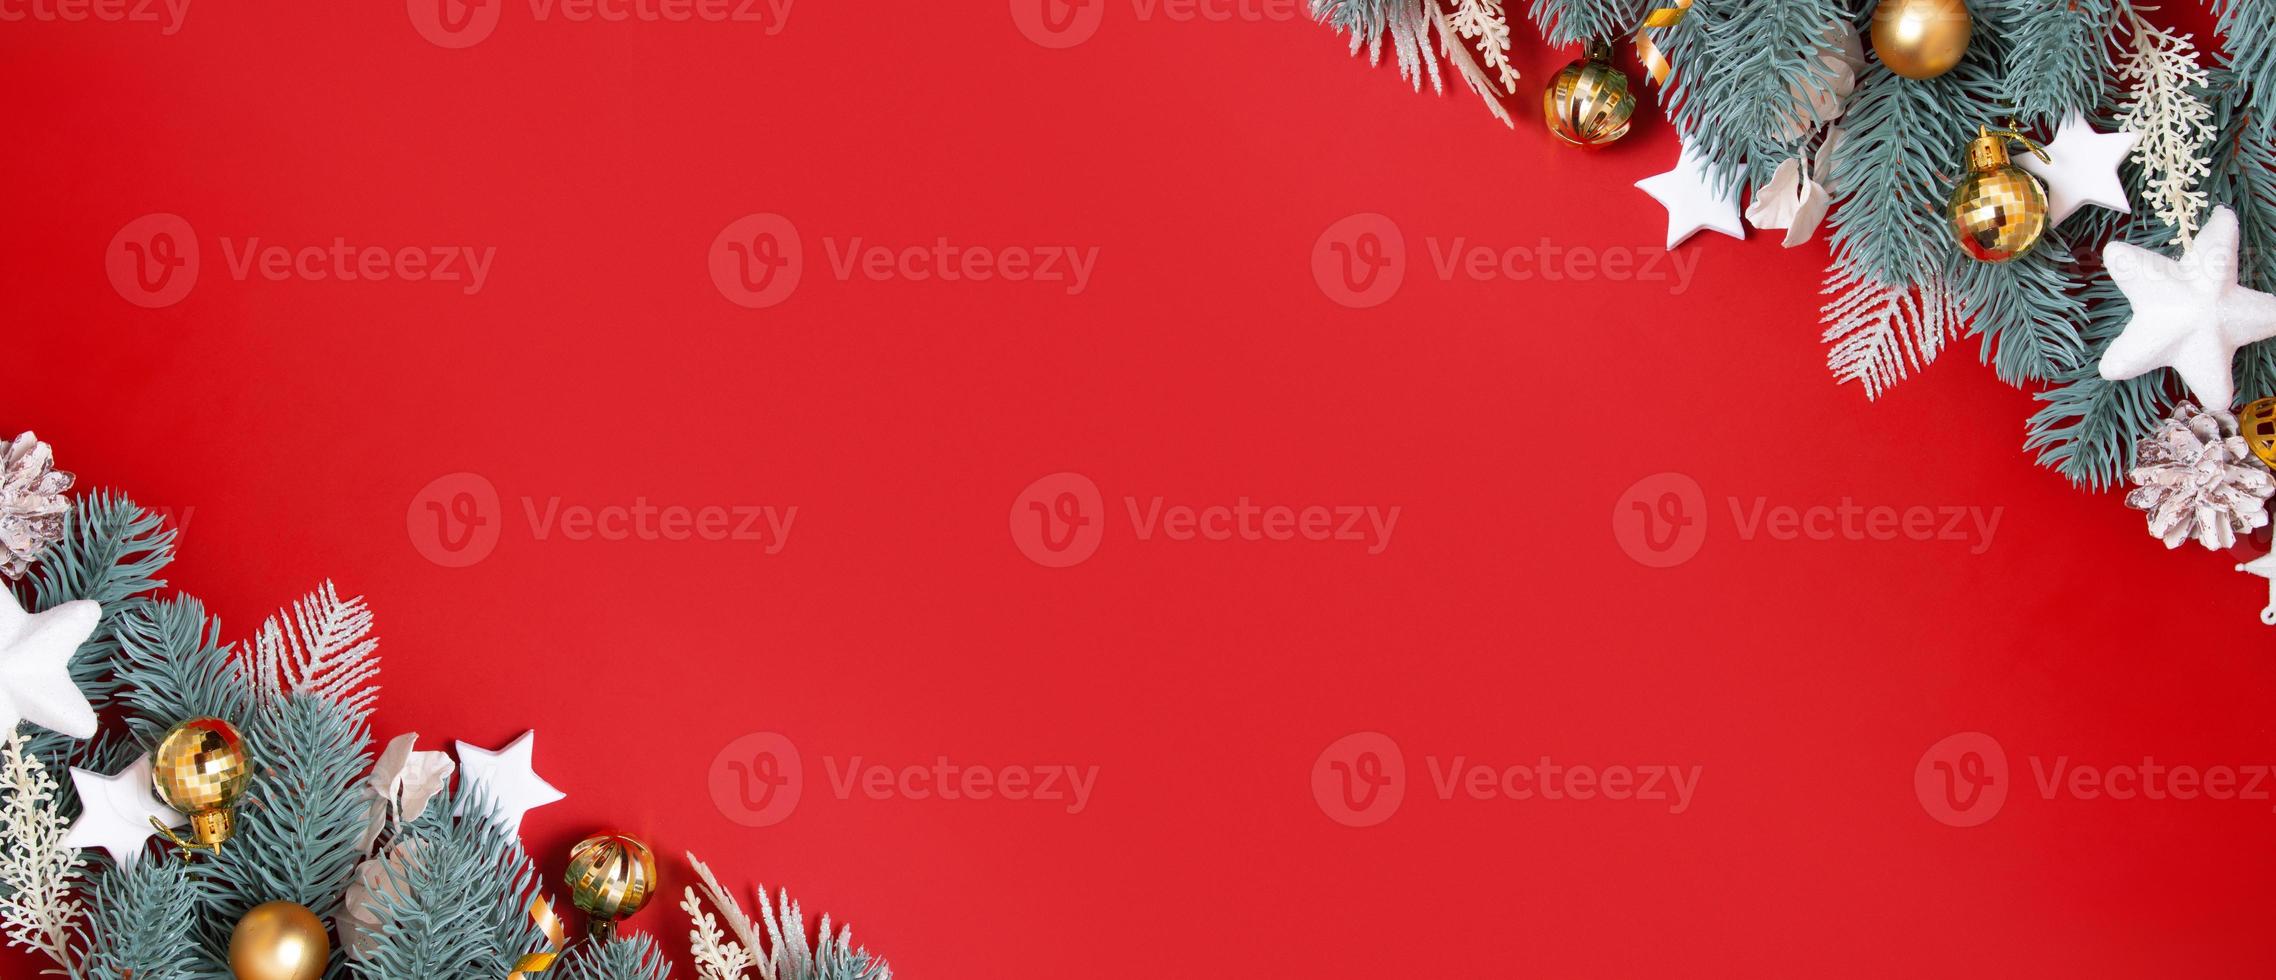 Banner with flat lay christmas decorations on red background with copy space for winter holidays greetings photo